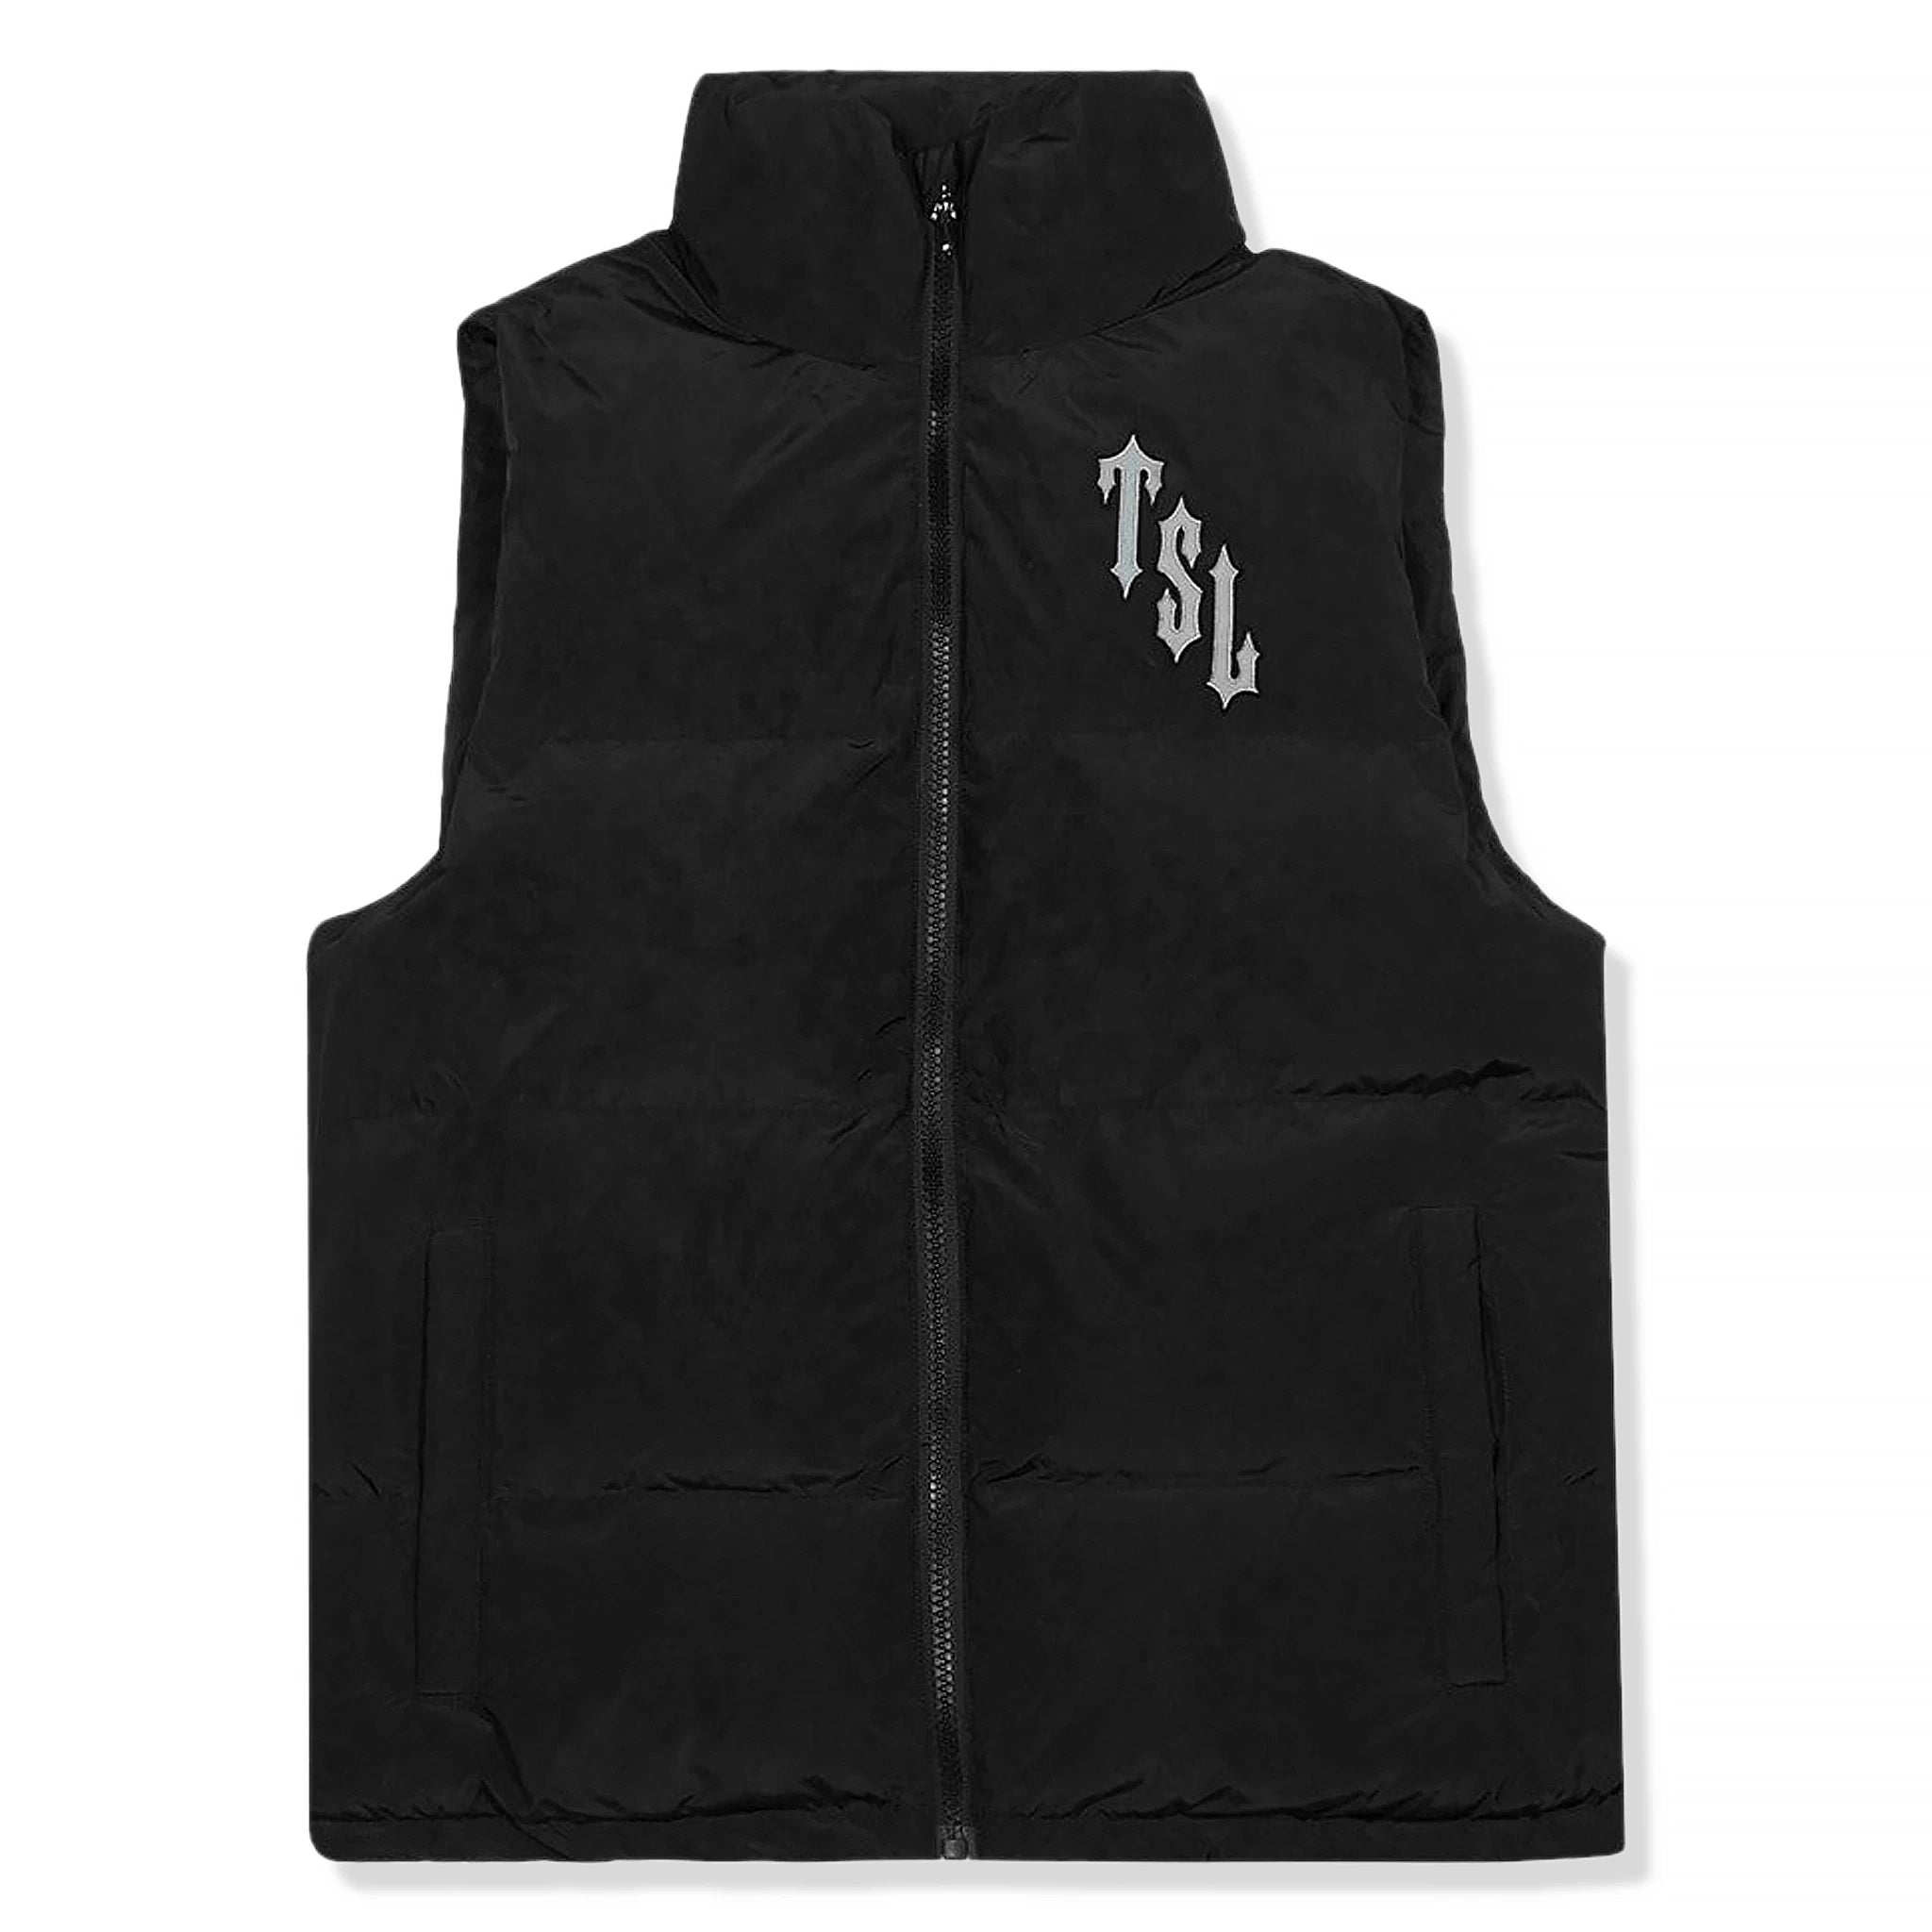 Front view of Trapstar Shooters Black Reflective Gilet